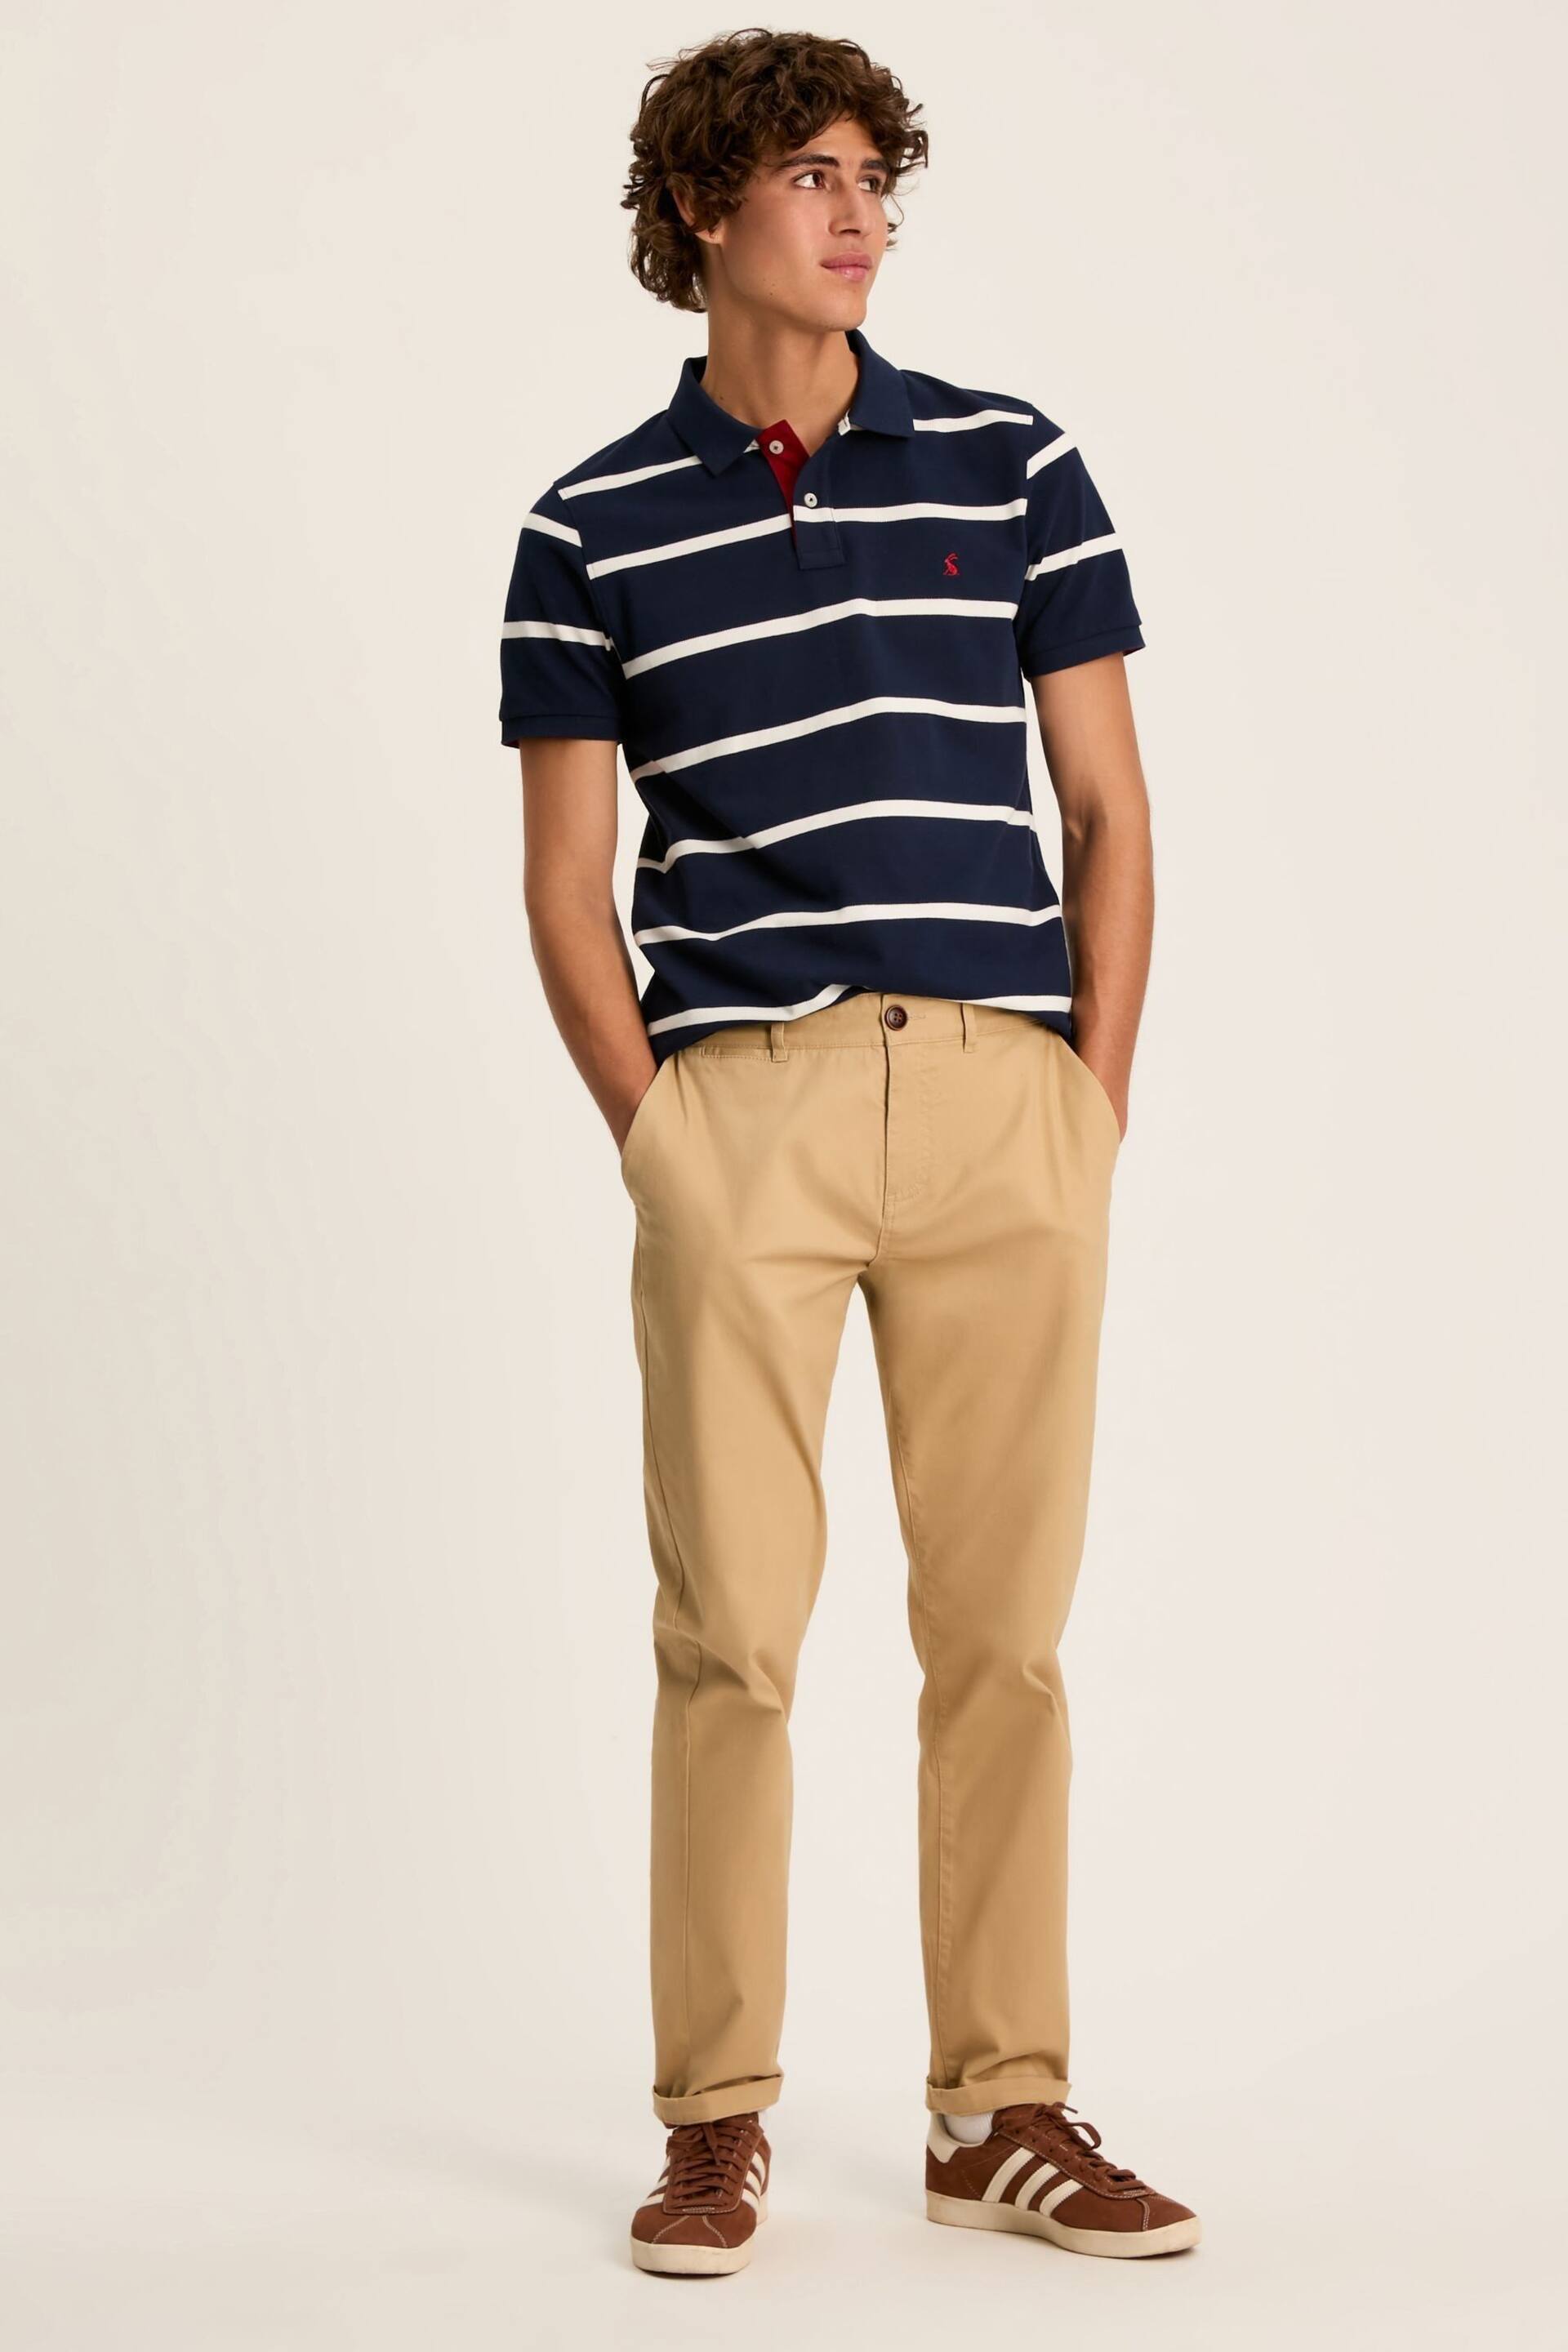 Joules Filbert Navy/White Slim Fit Striped Polo Shirt - Image 4 of 8